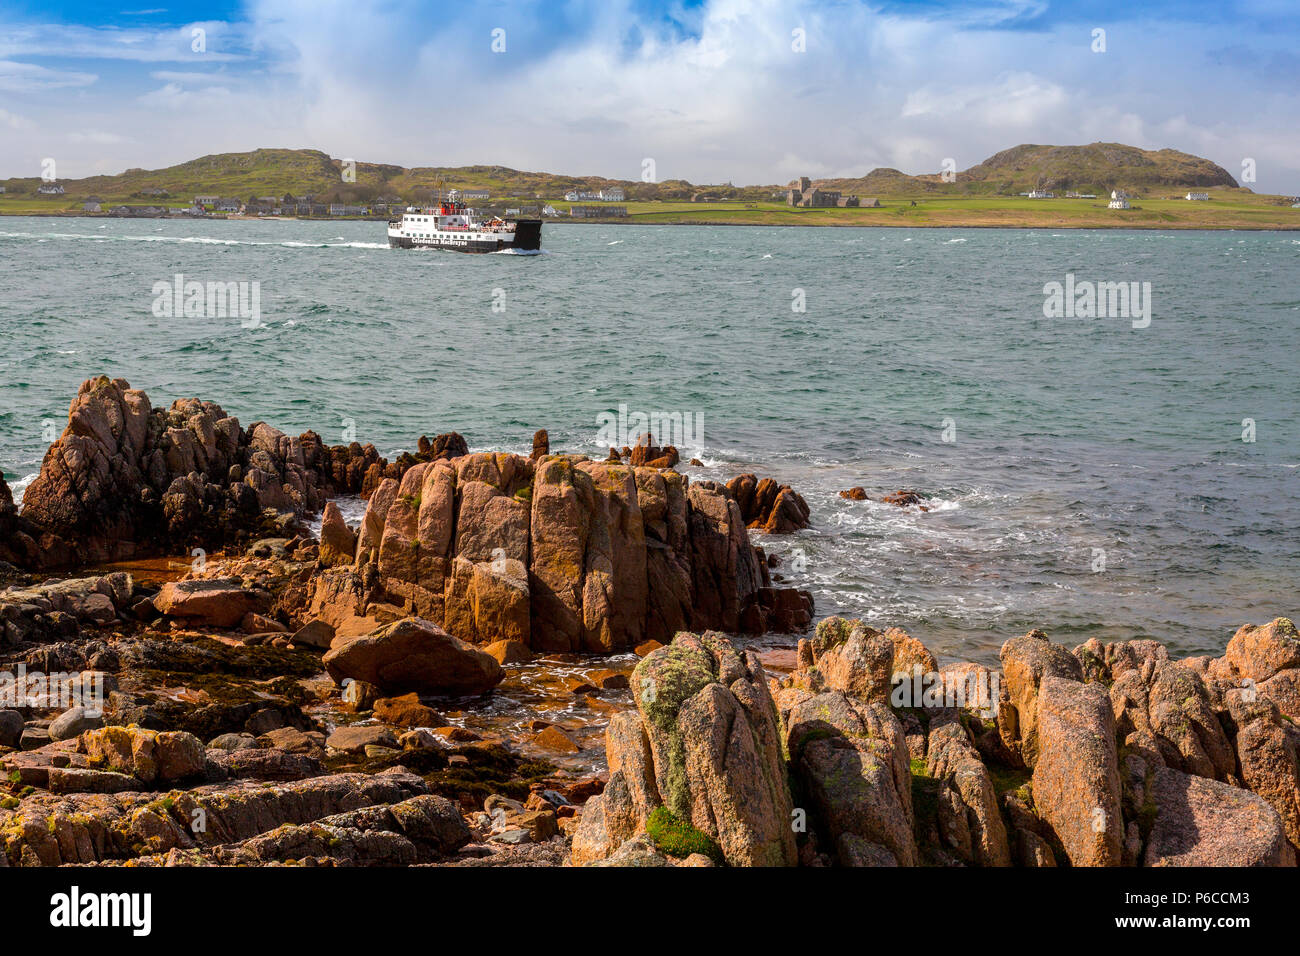 The Isle of Iona ferry ‘Loch Buie’ approaching the red granite rocks of Fionnphort on the Isle of Mull, Argyll and Bute, Scotland, UK Stock Photo